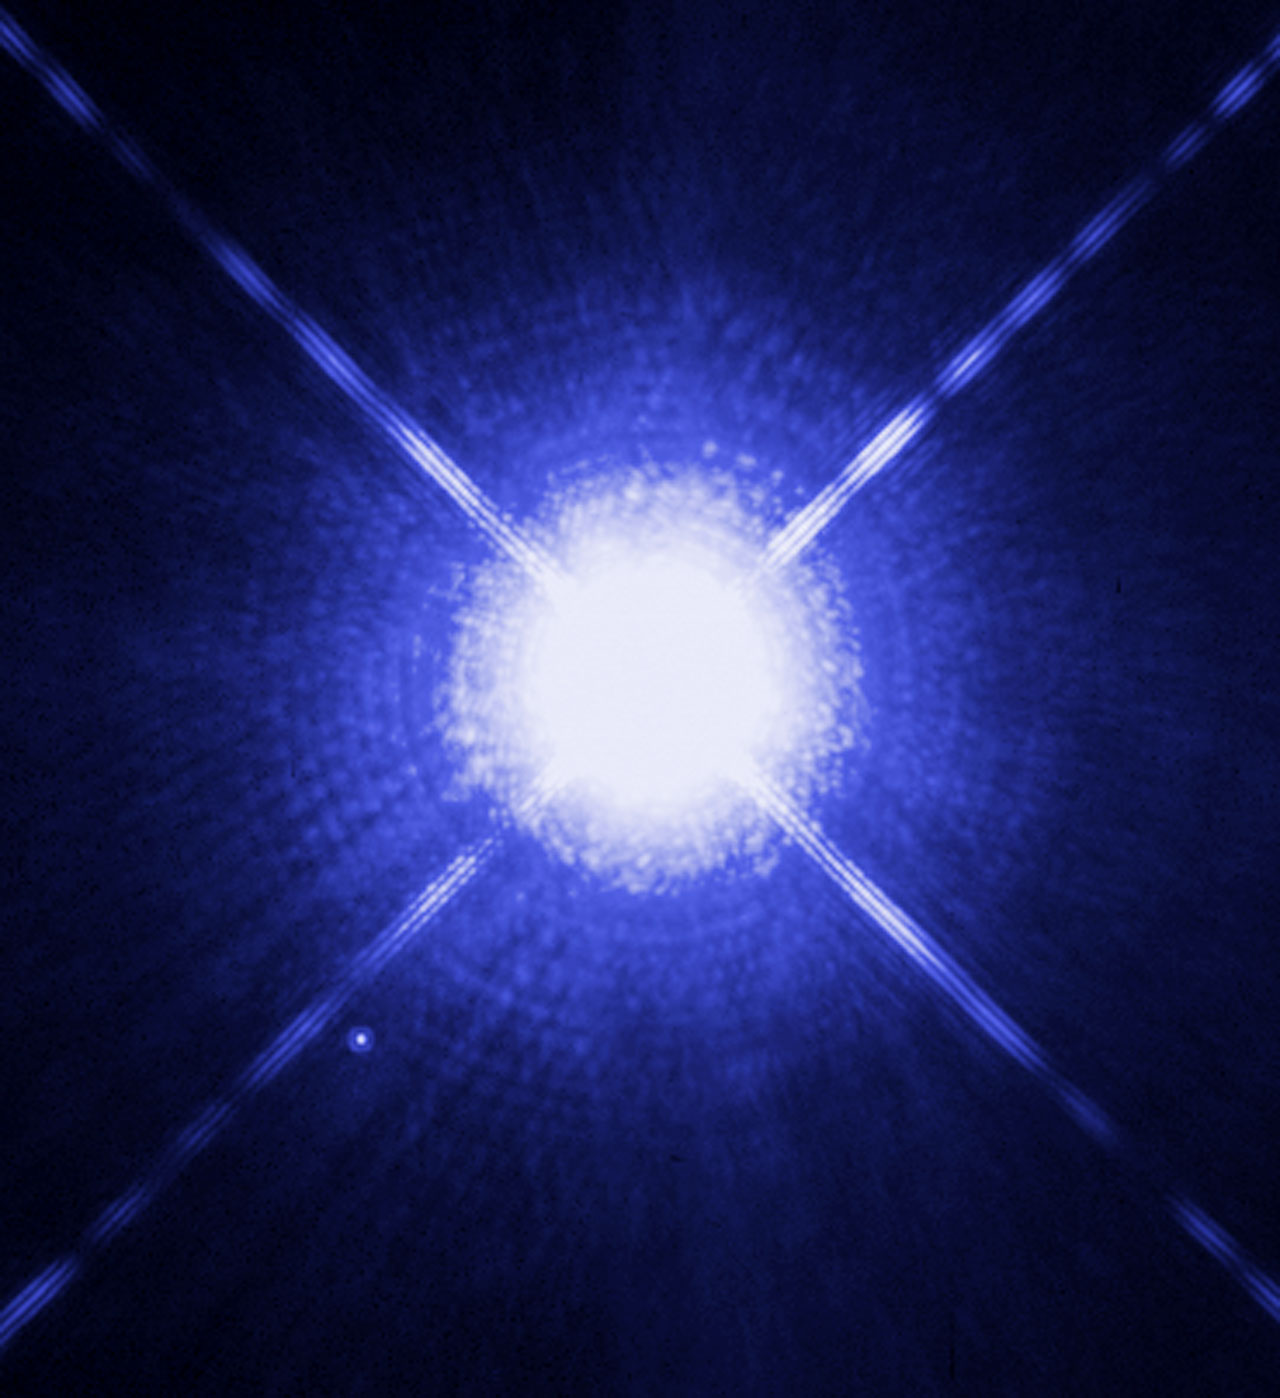 Sirius A, with Sirius B visible in the lower left quadrant.